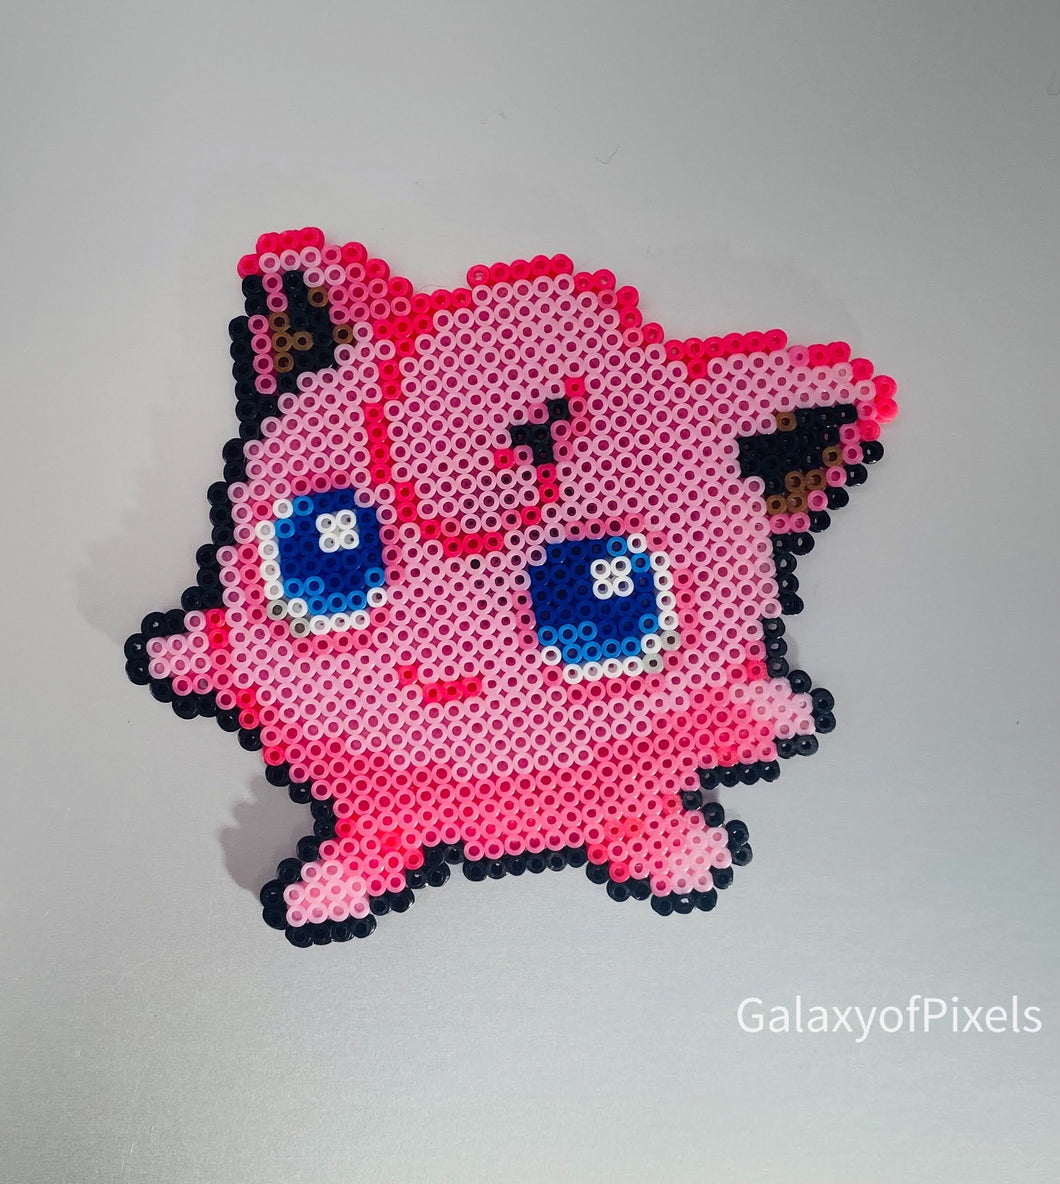 Togepi & Jigglypuff Magnets, Cartoon Perler, Refrigerator - Perfect for Backpacks, Lockers, Party Favors, Bags, Back to School